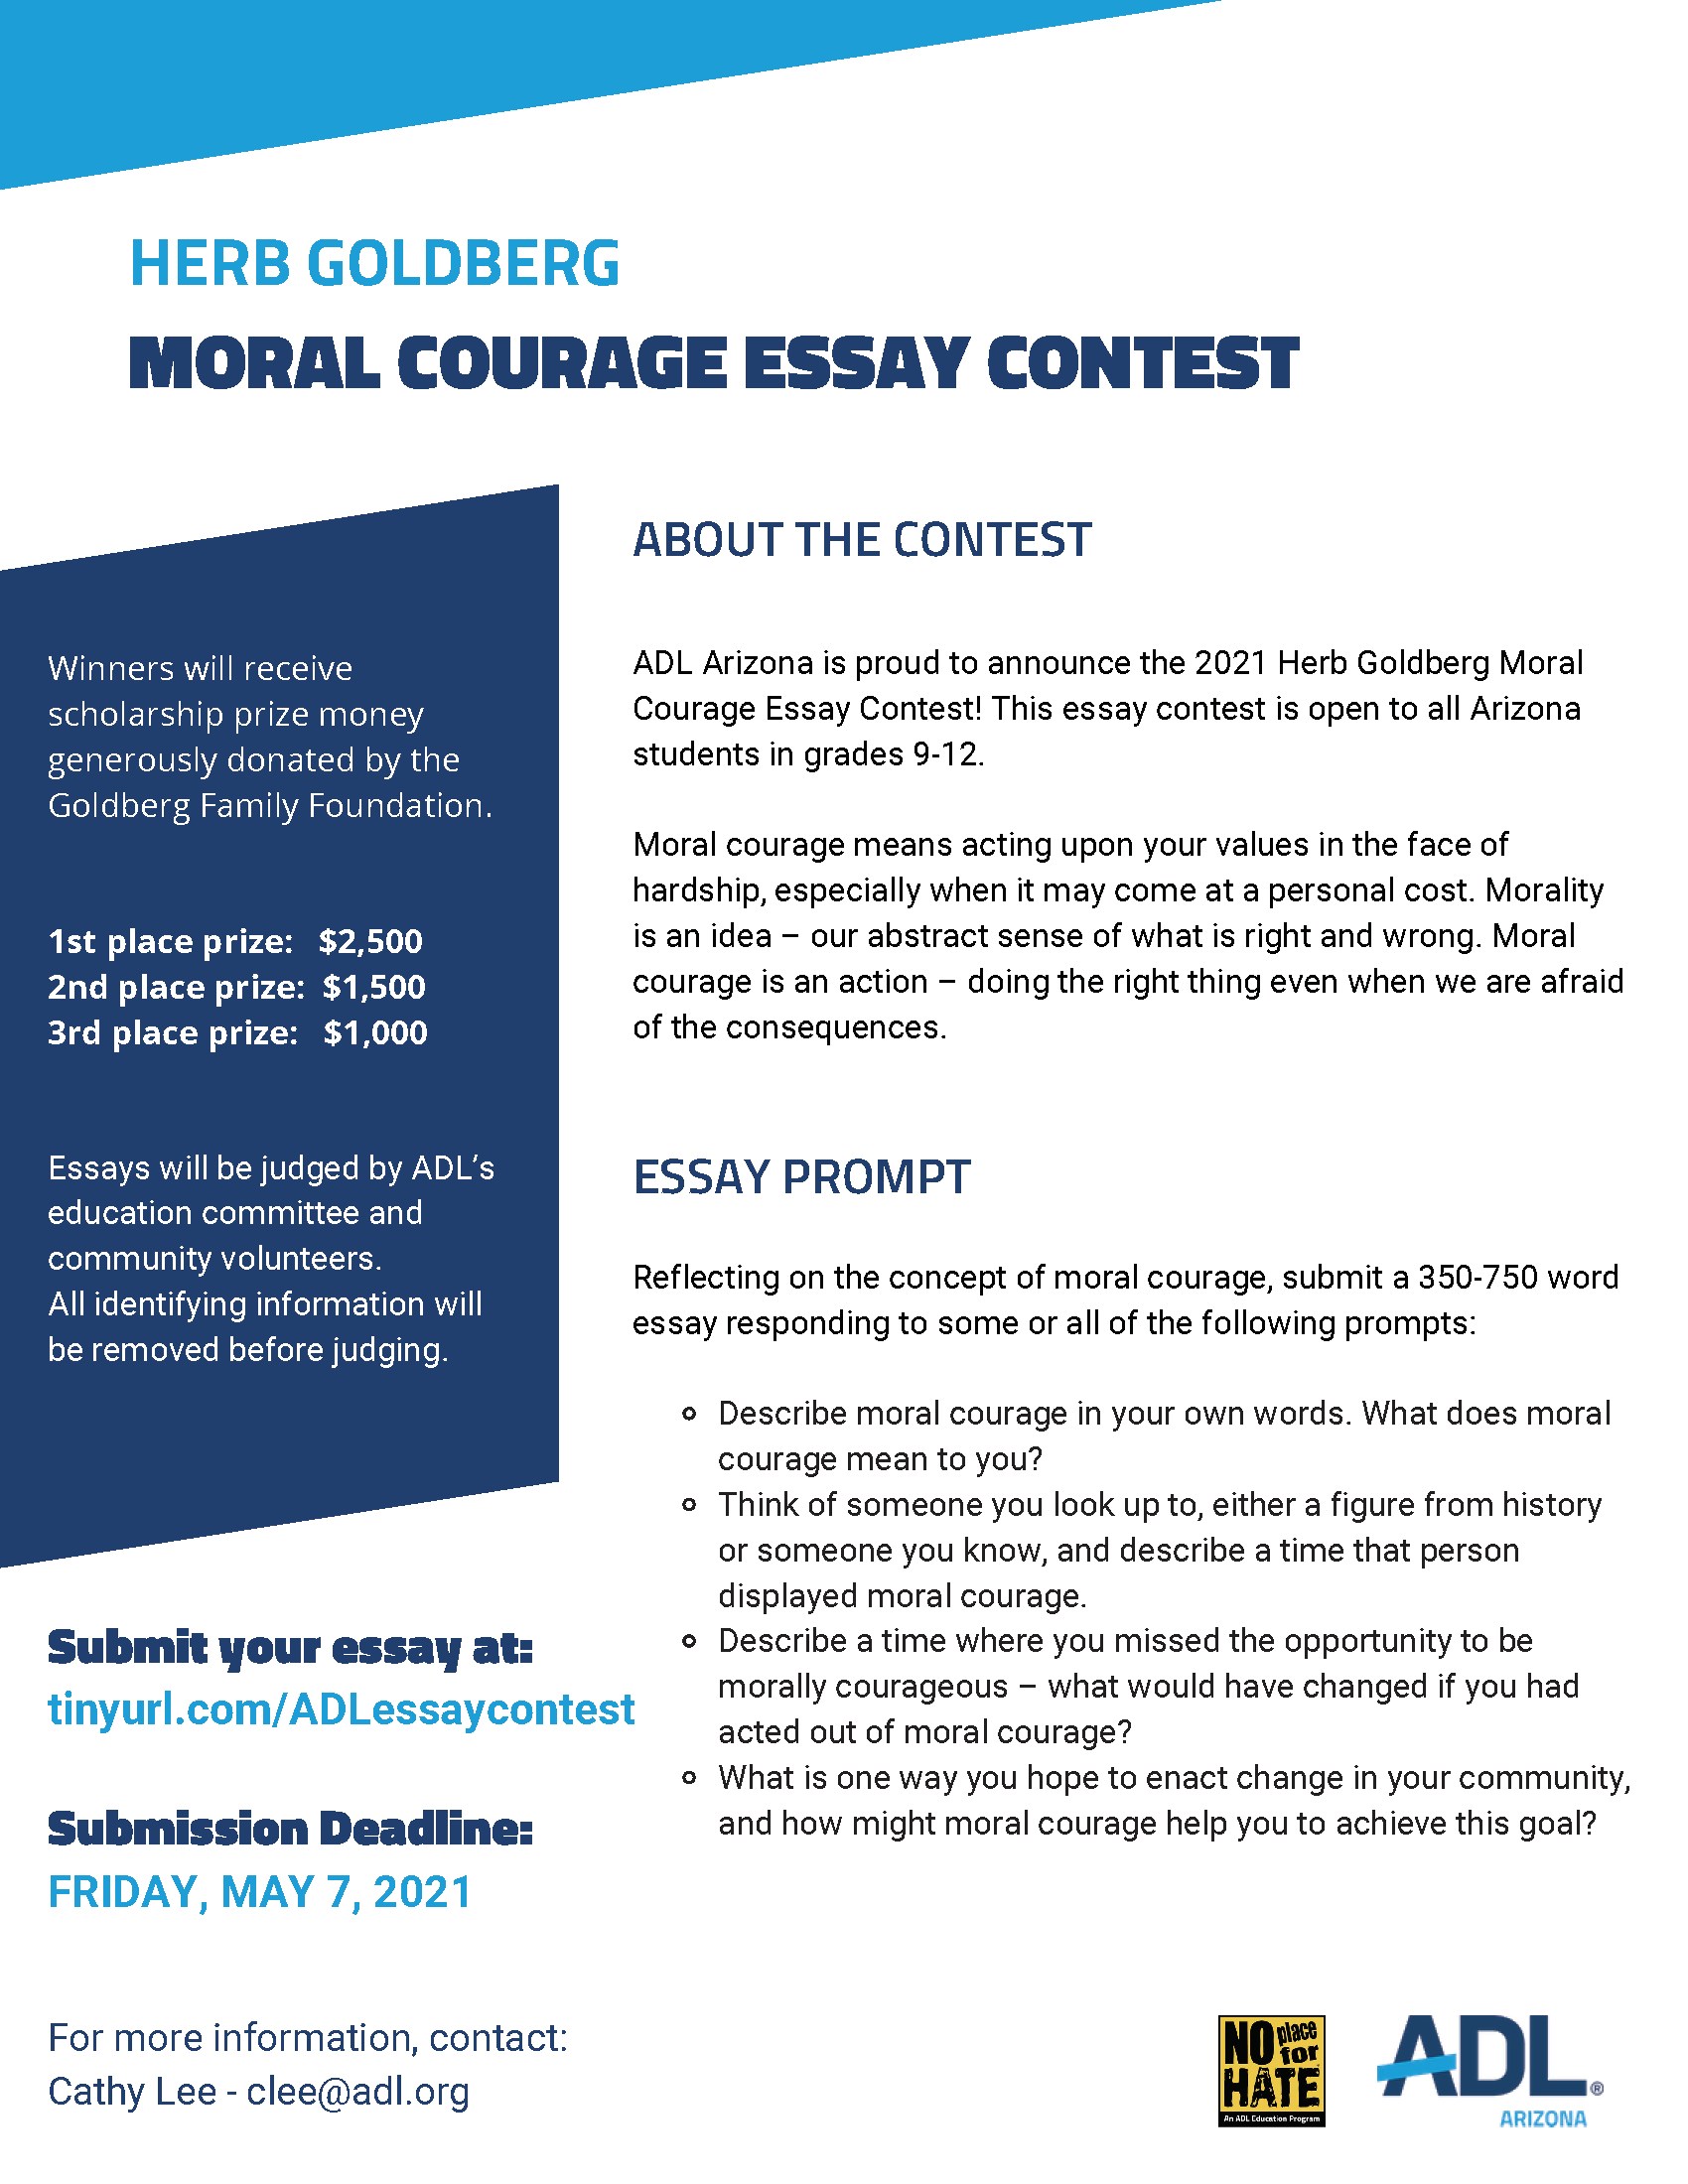 https://arizona.adl.org/files/2021/03/Copy-of-2021-Moral-Courage-Essay-Contest-Flier-1.png